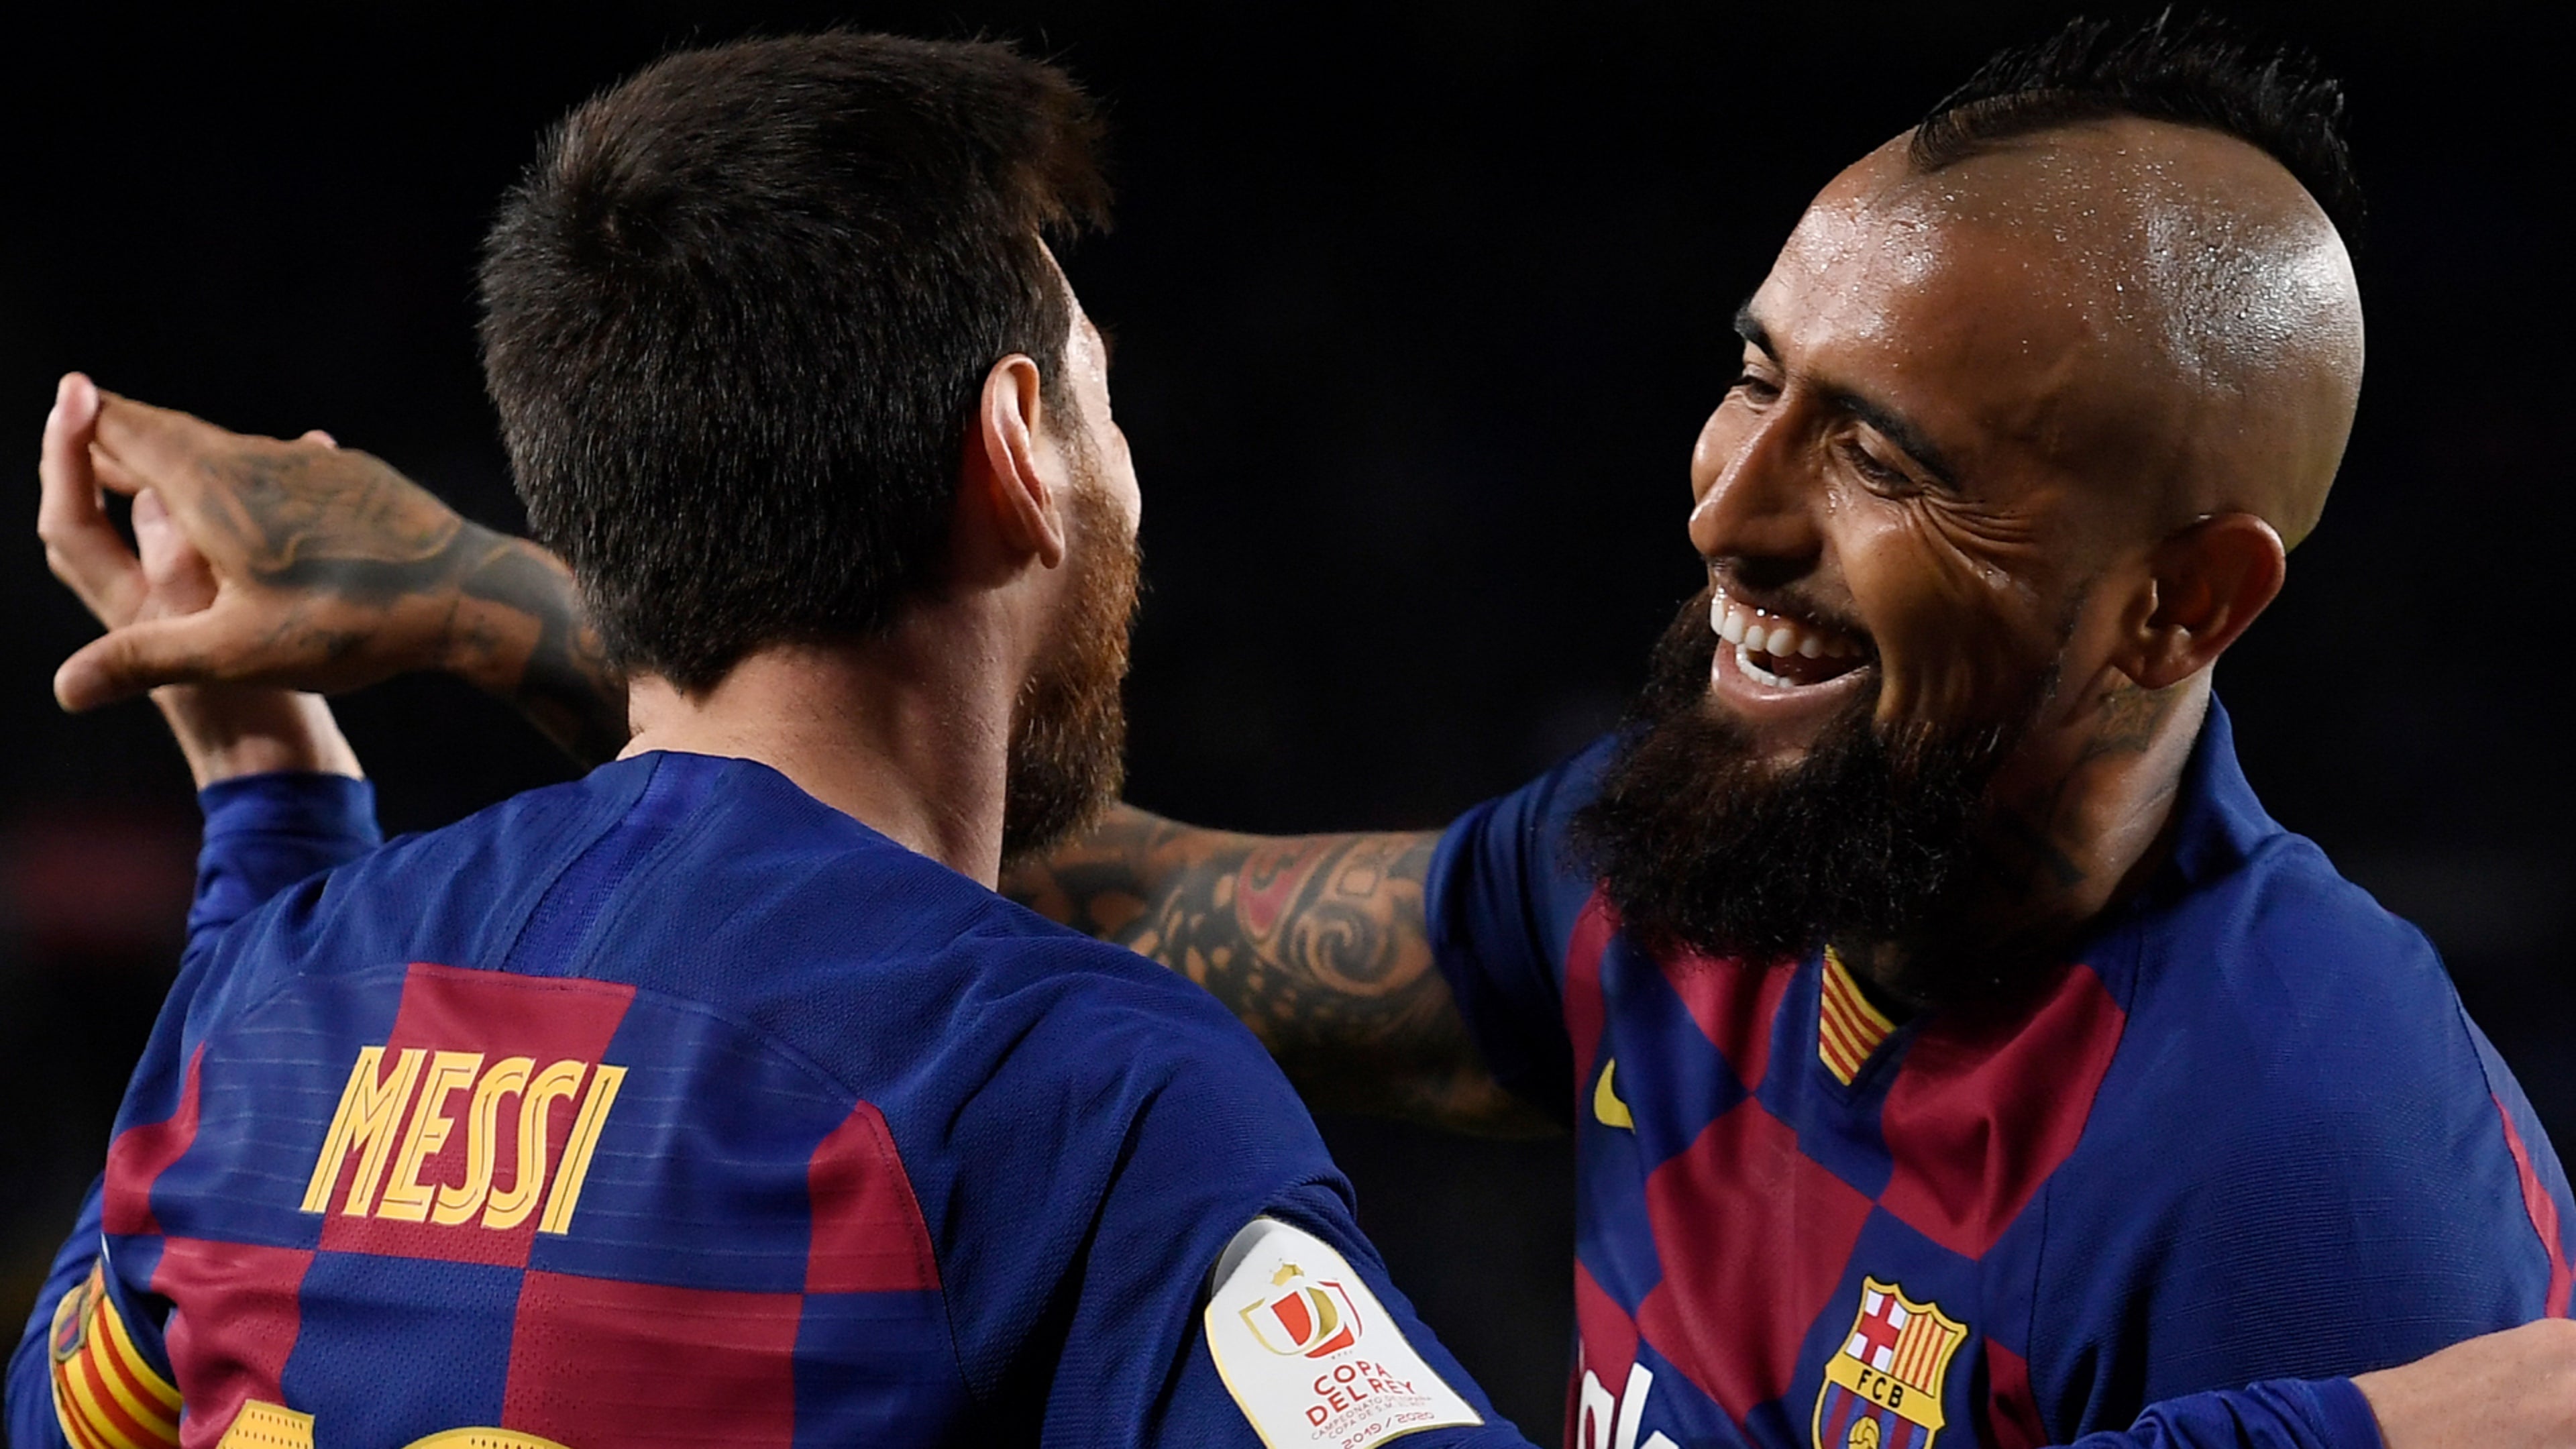 Lionel Messi to reunite with another ex-Barcelona team-mate